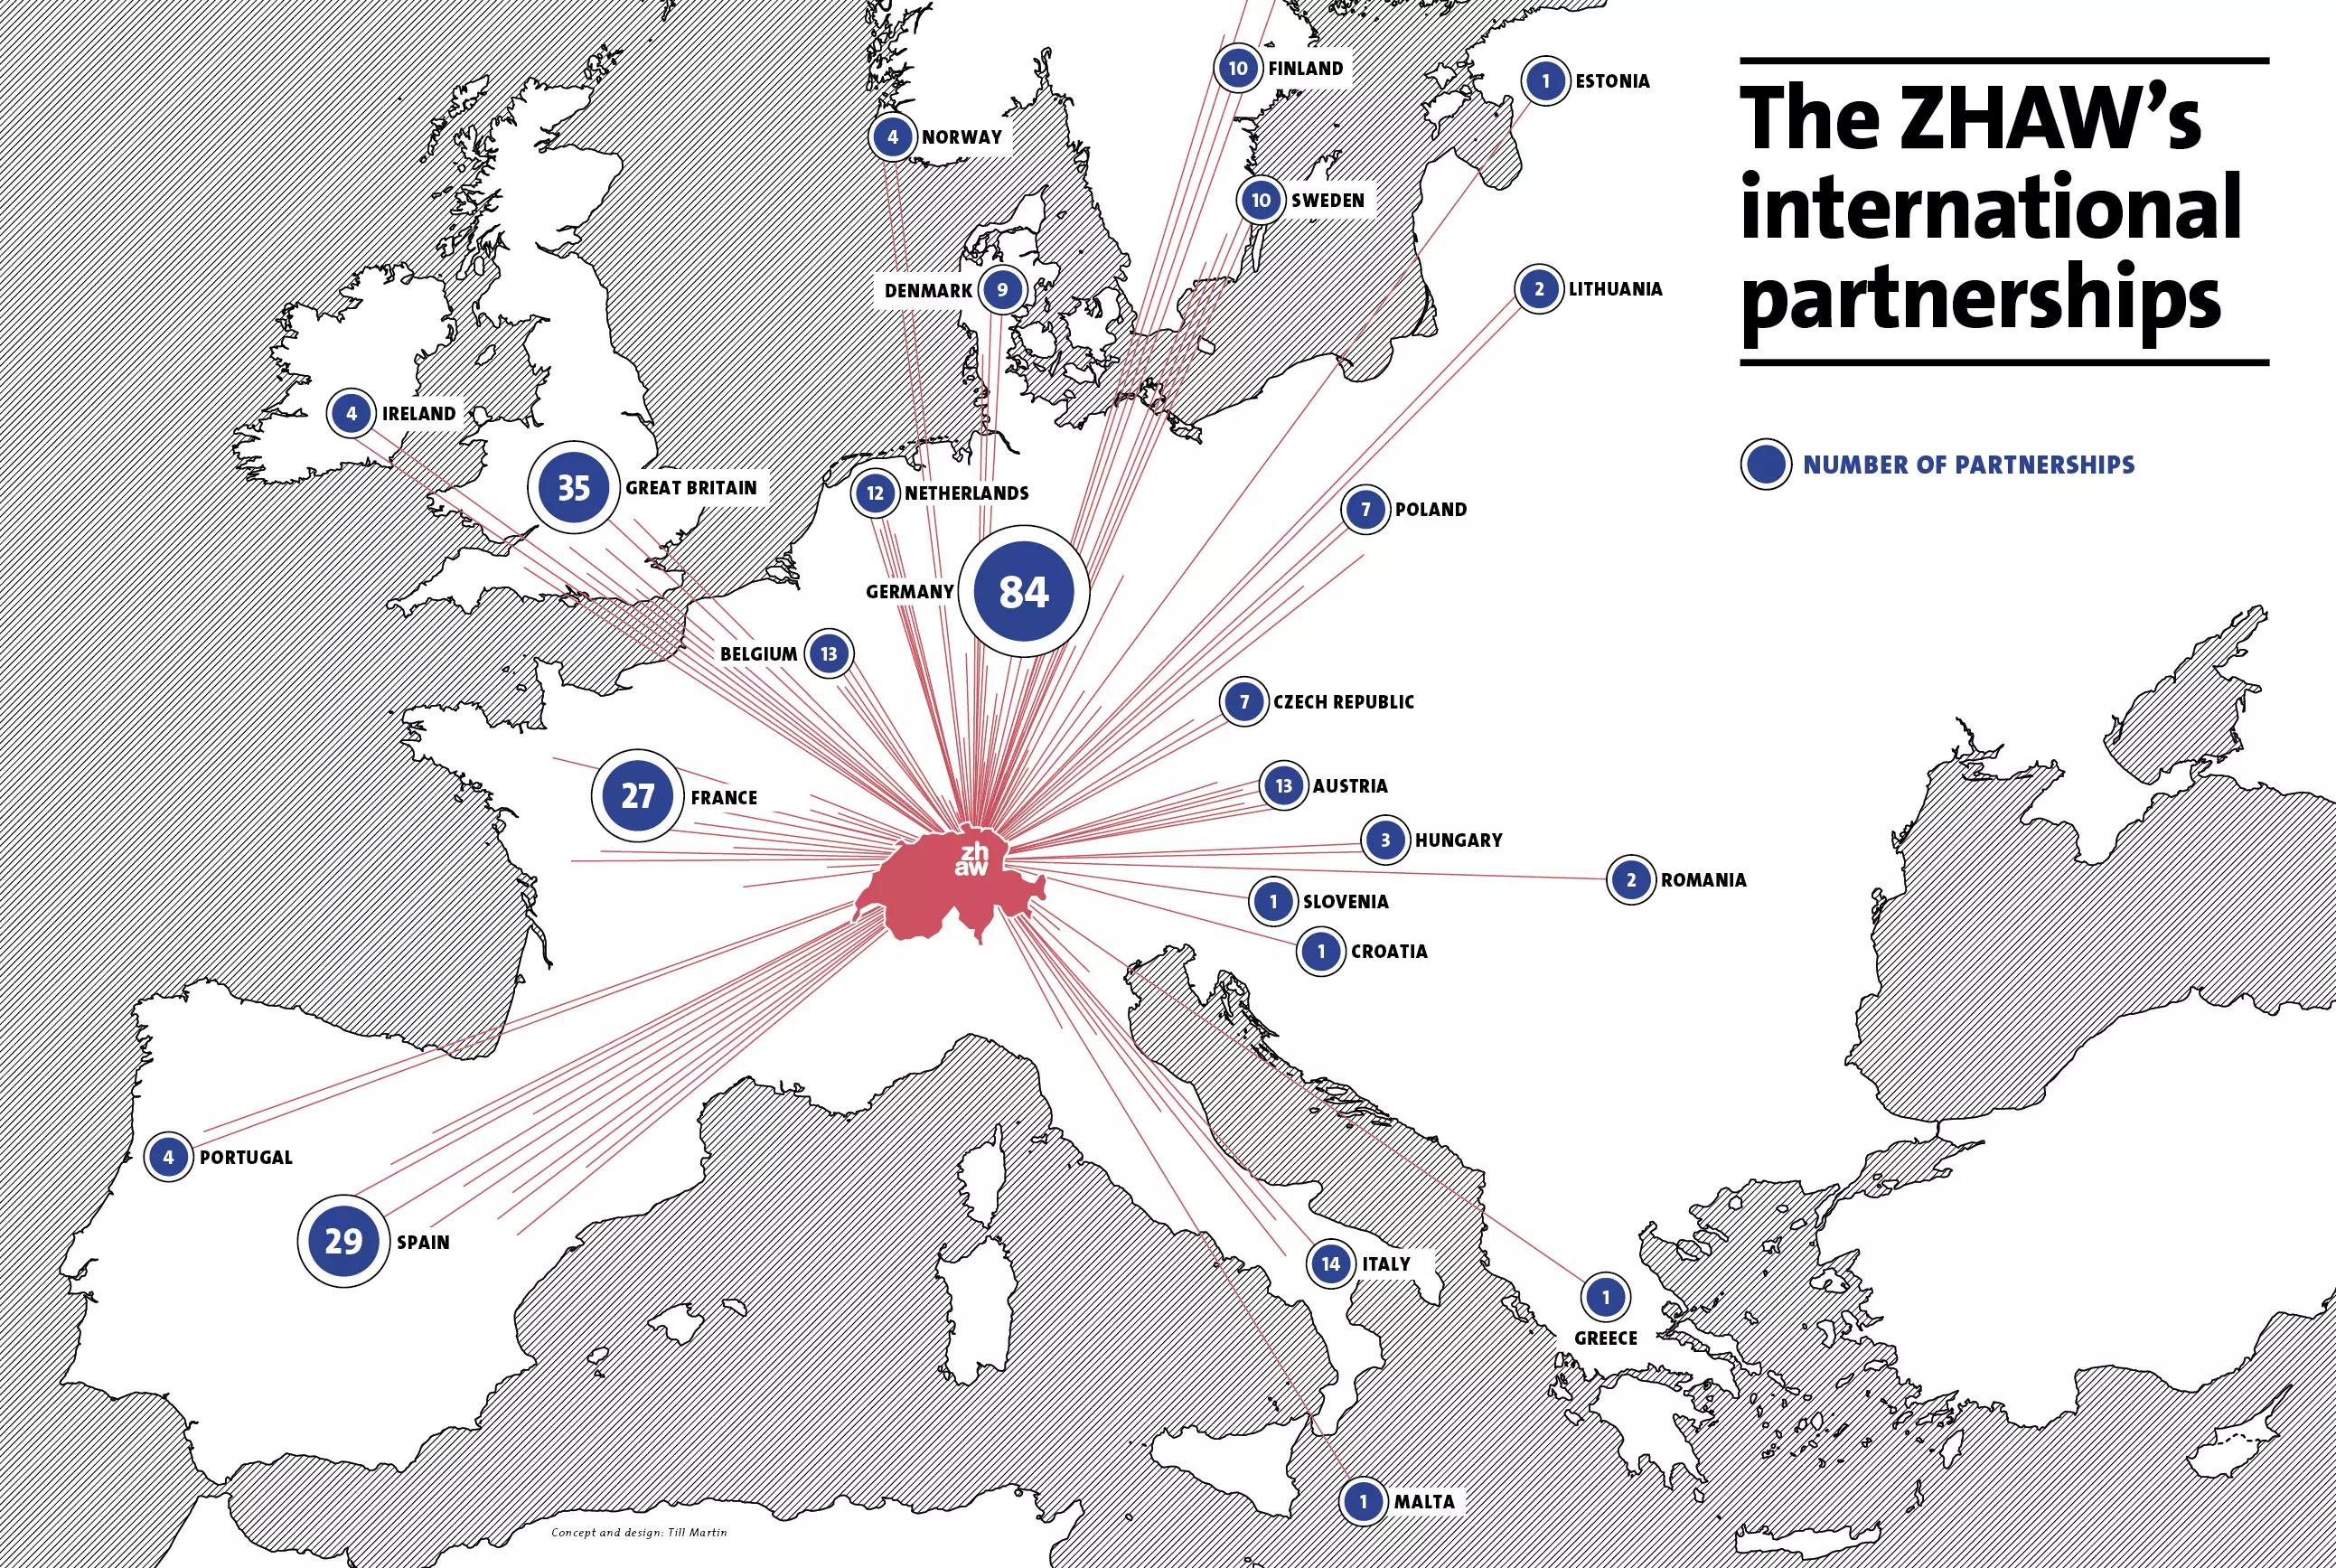 The ZHAW's network in Europe